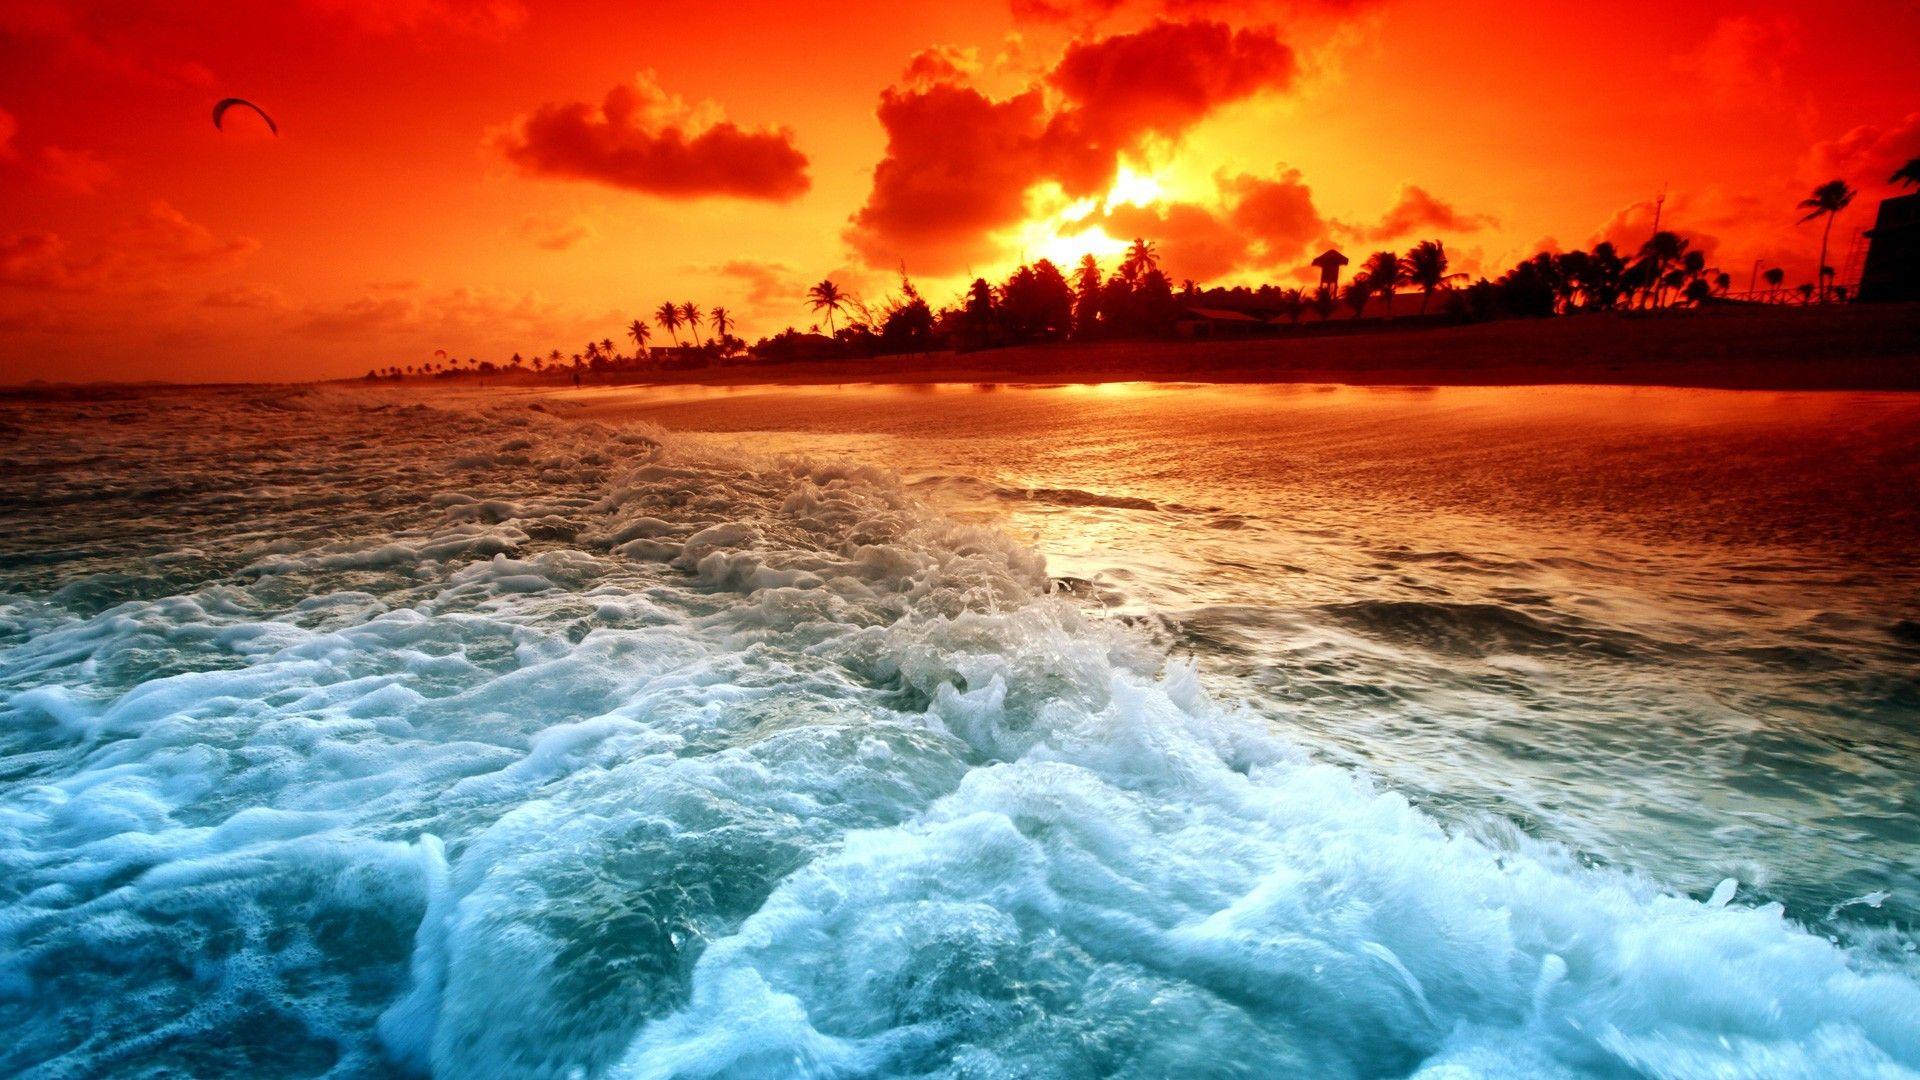 High Quality Sunset Wallpapers Top Free High Quality Sunset